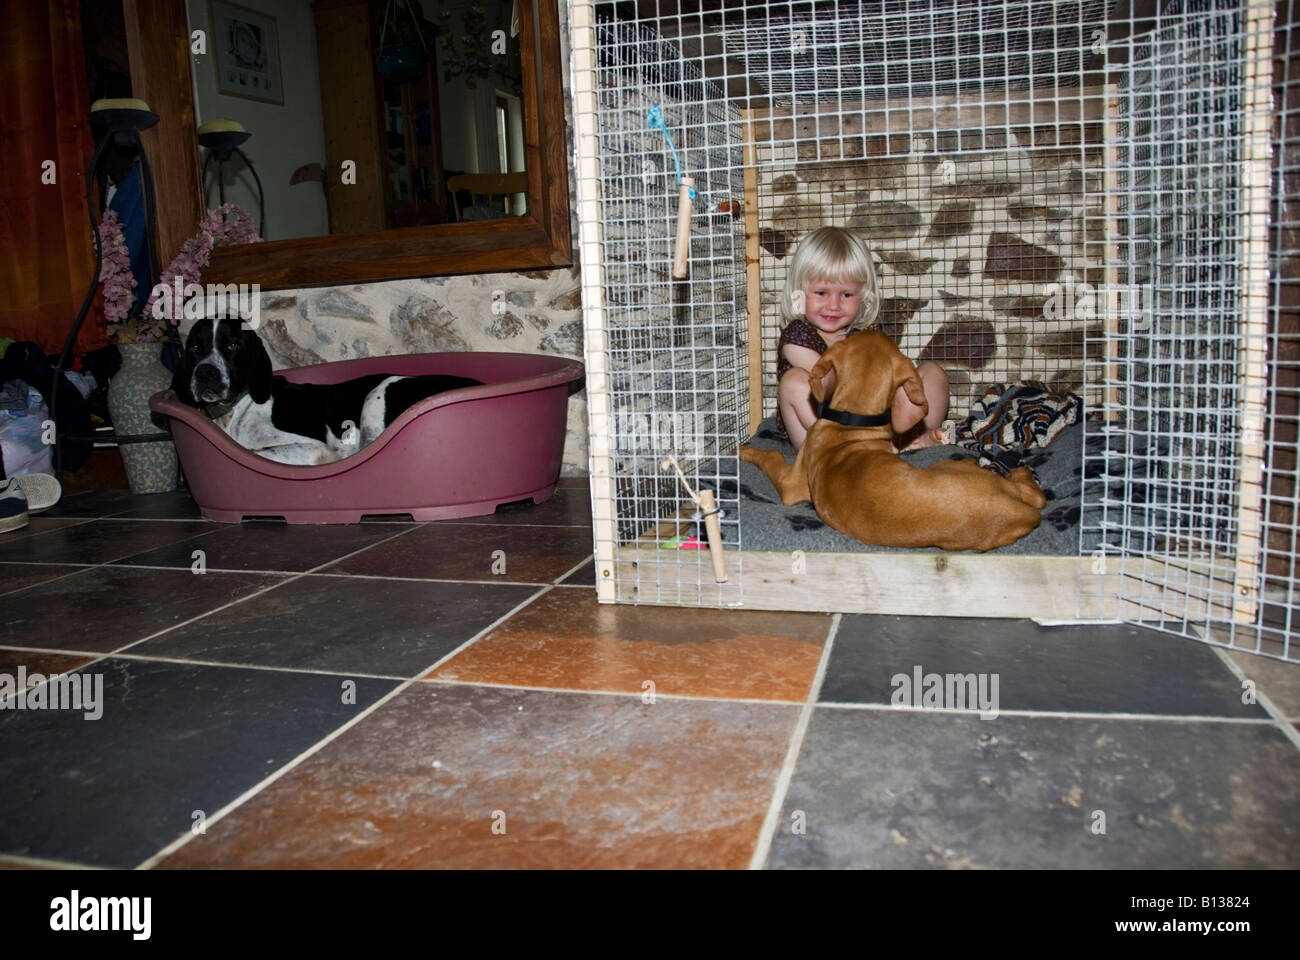 Stock photo of a blond haried two year old girl playing with her puppy in the dog cage Stock Photo